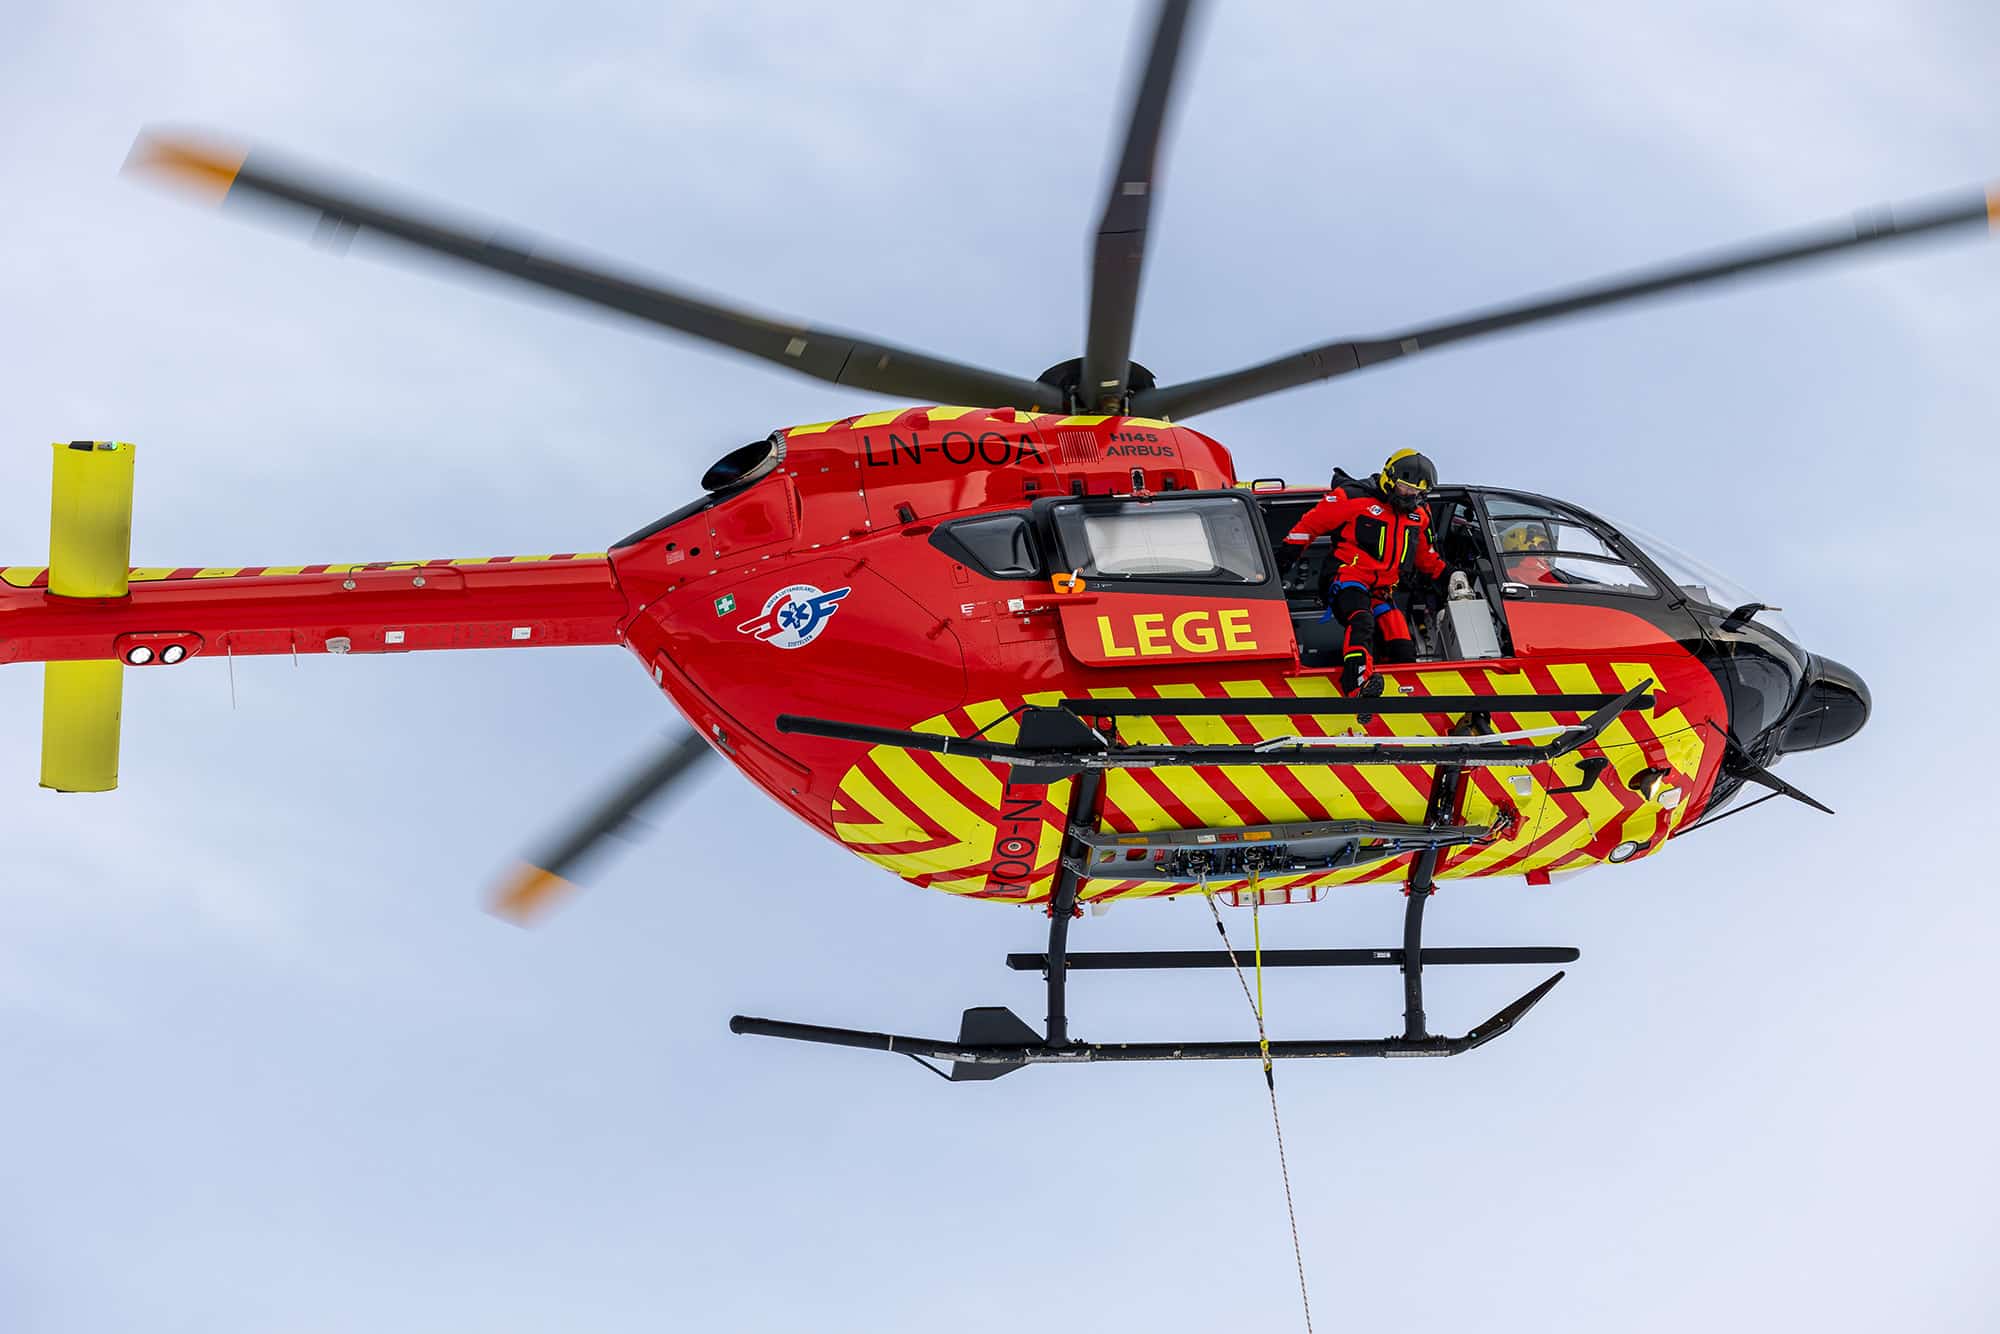 The Norwegian Air Ambulance Foundation presents its Research & Development Helicopter to AirMed 2022.